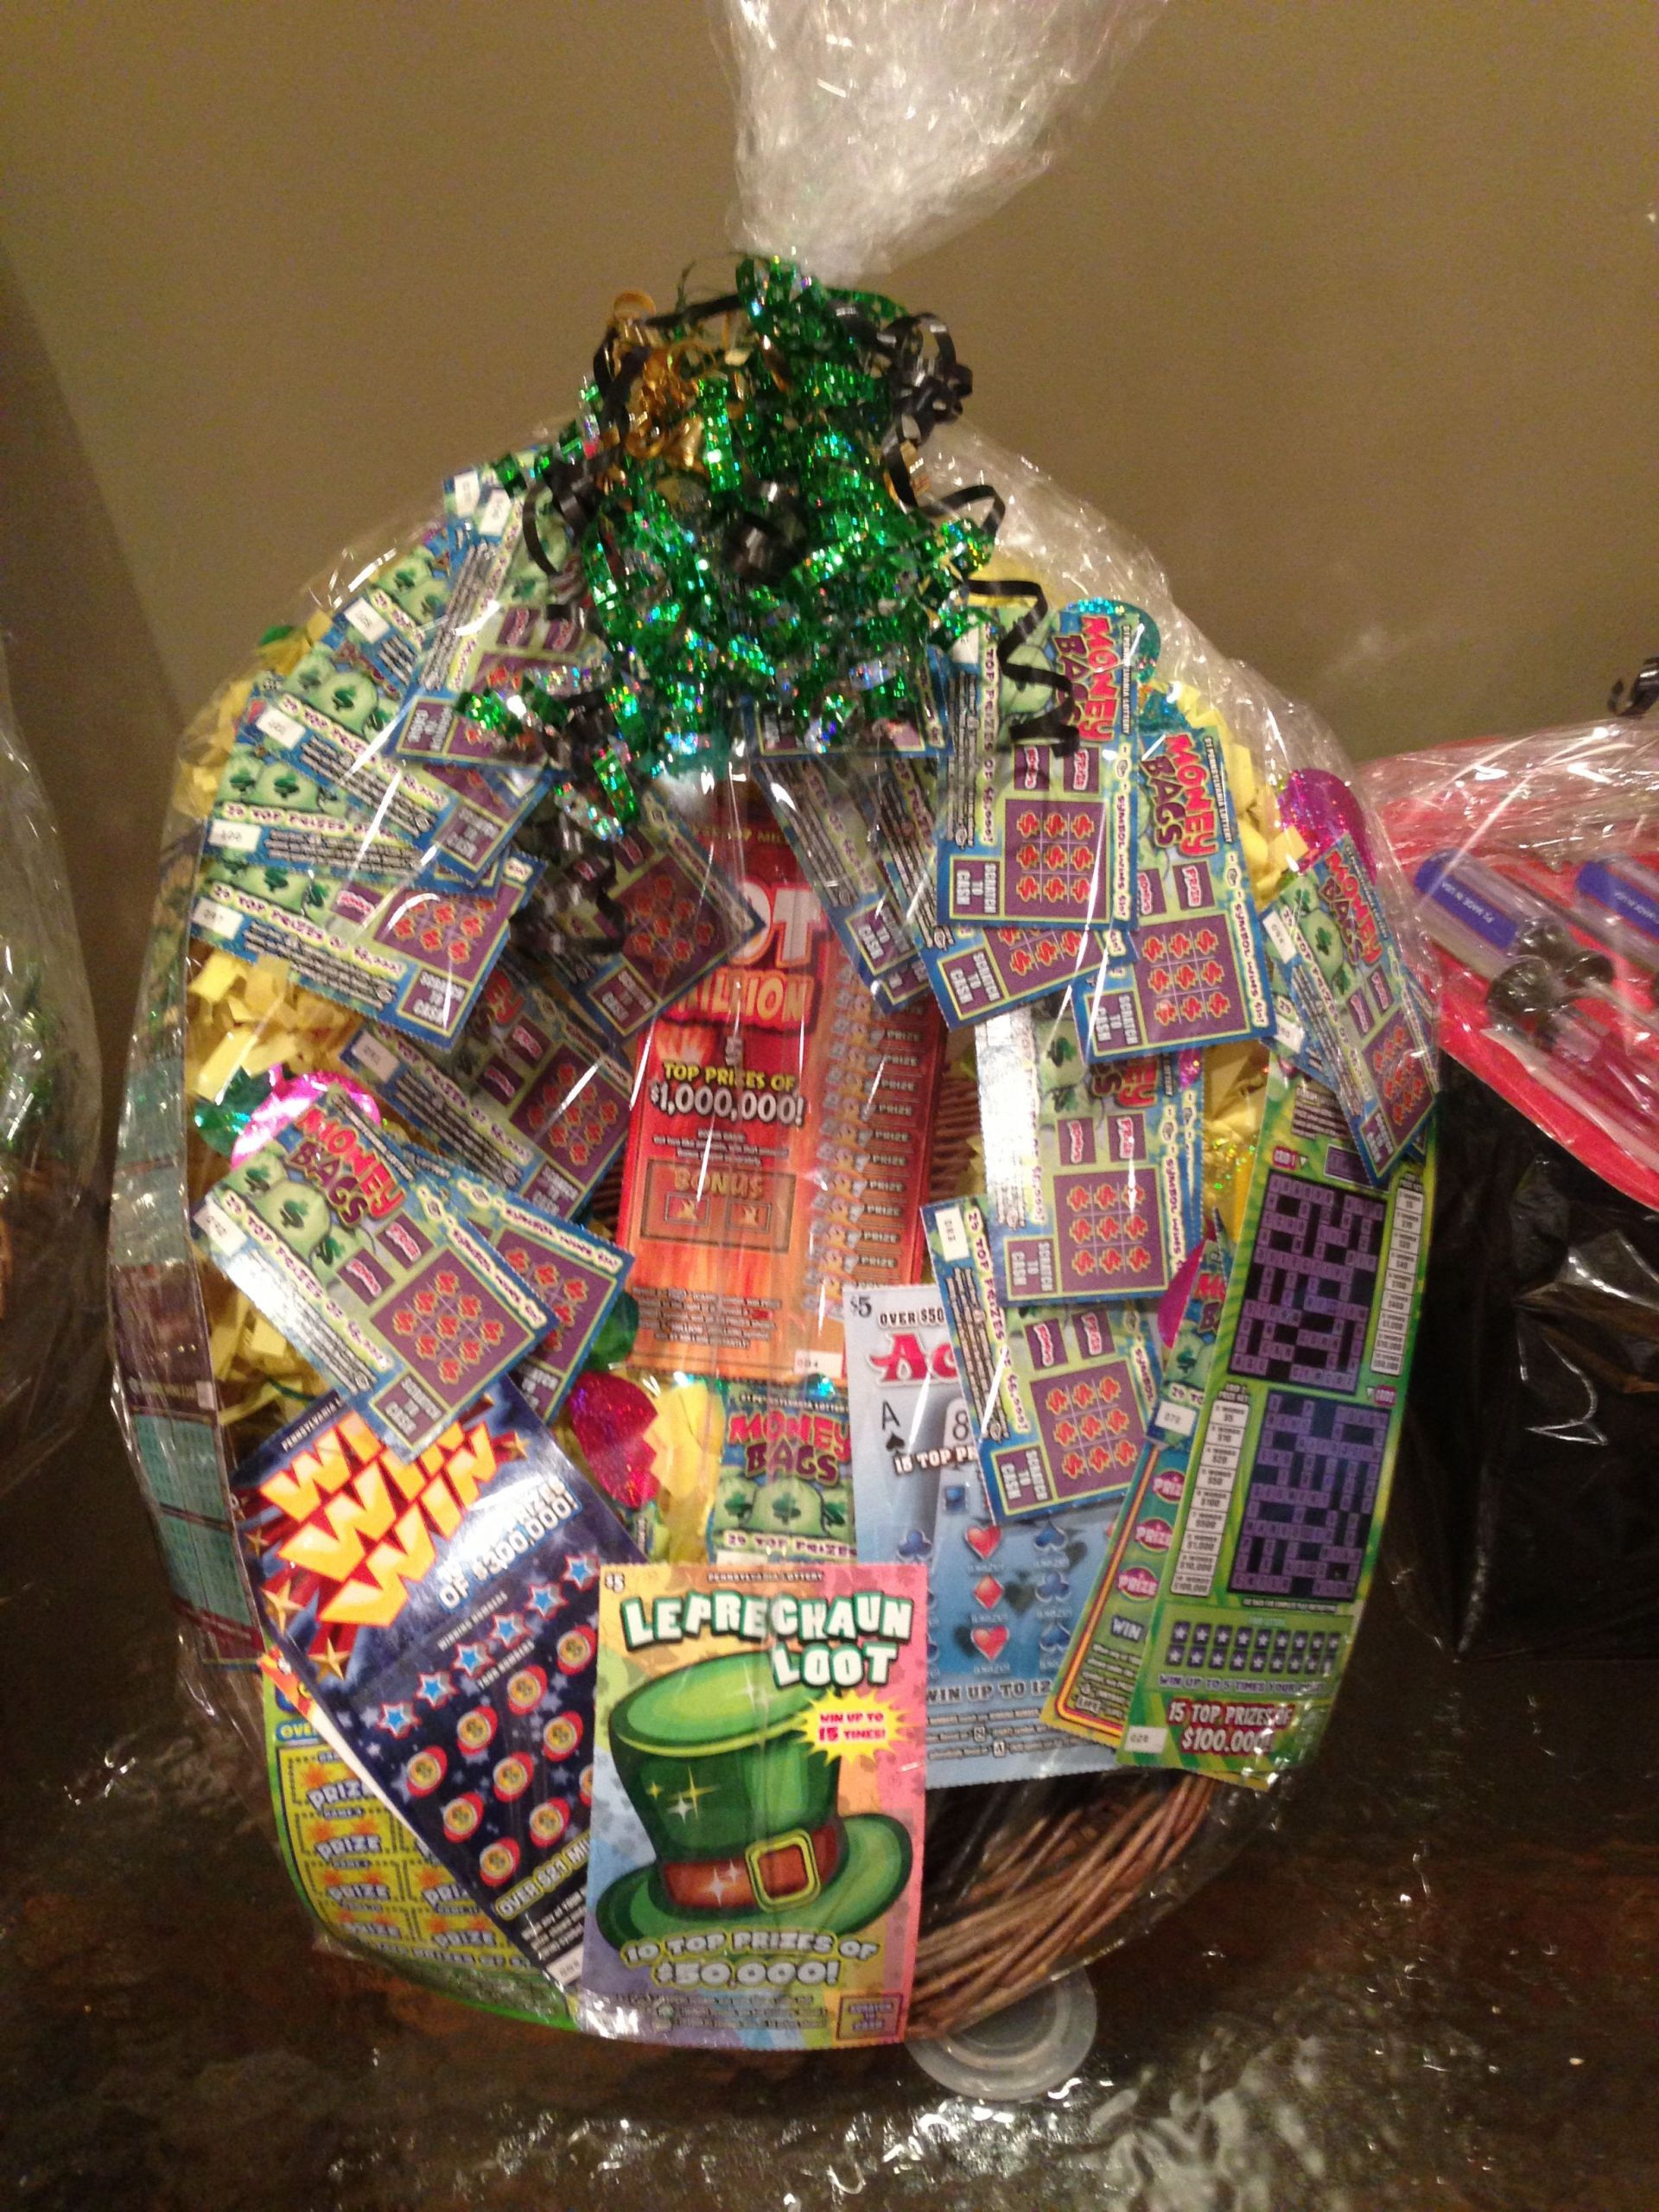 The 22 Best Ideas for Ideas for Raffle Gift Baskets - Home ...